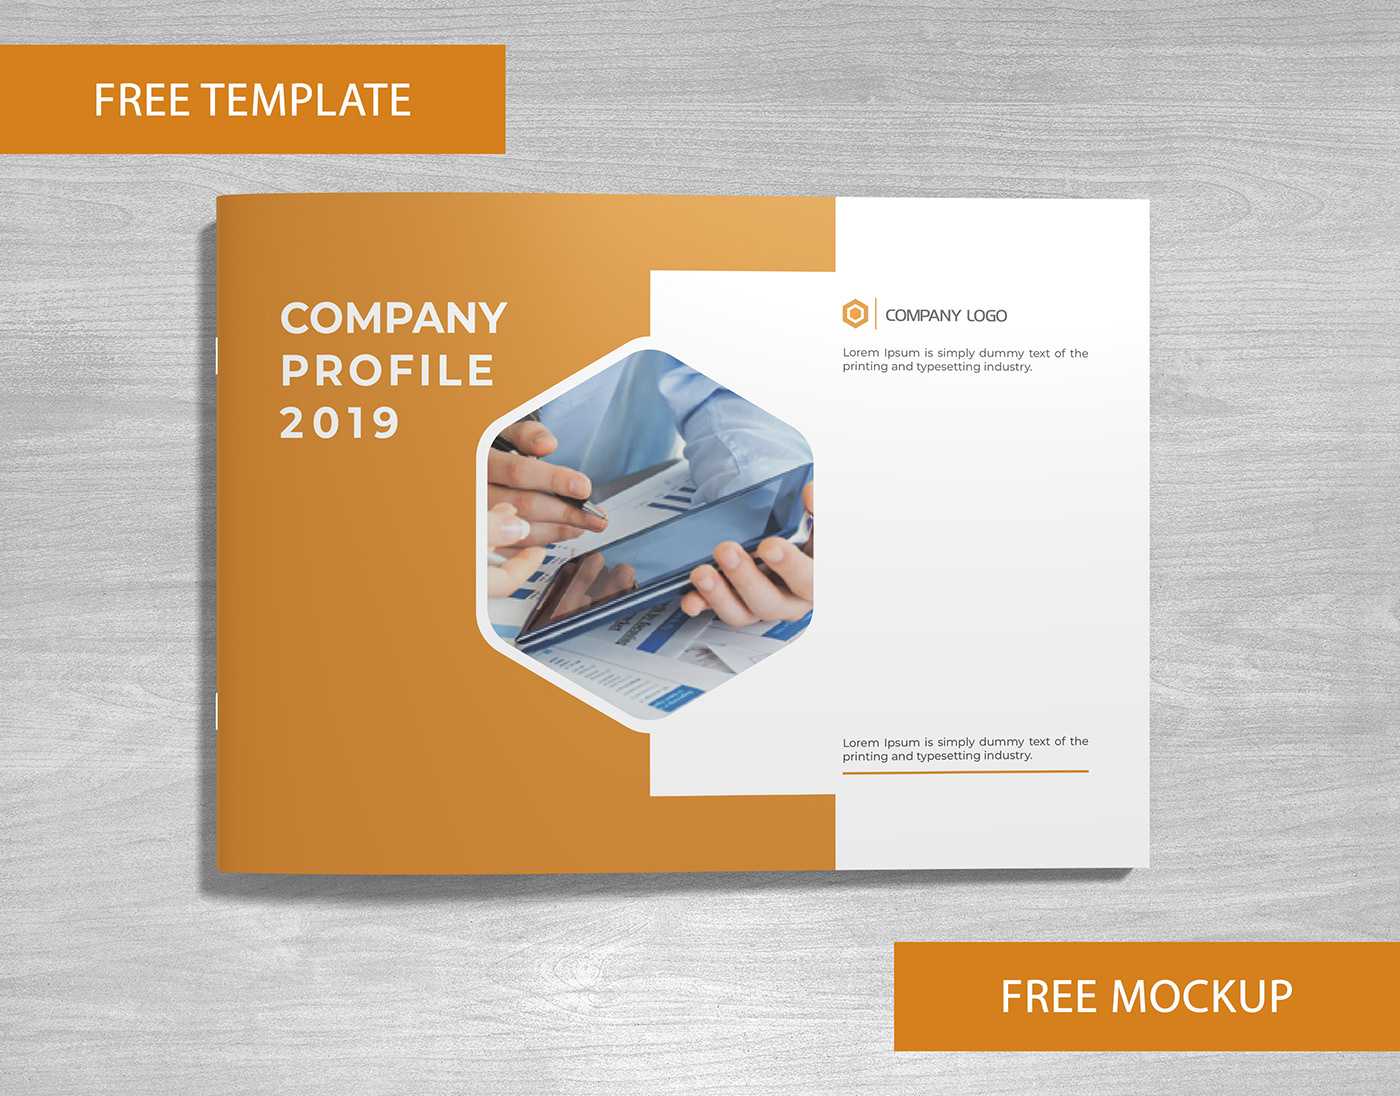 Company Profile Free Template And Mockup Download On Behance Throughout Free Brochure Template Downloads